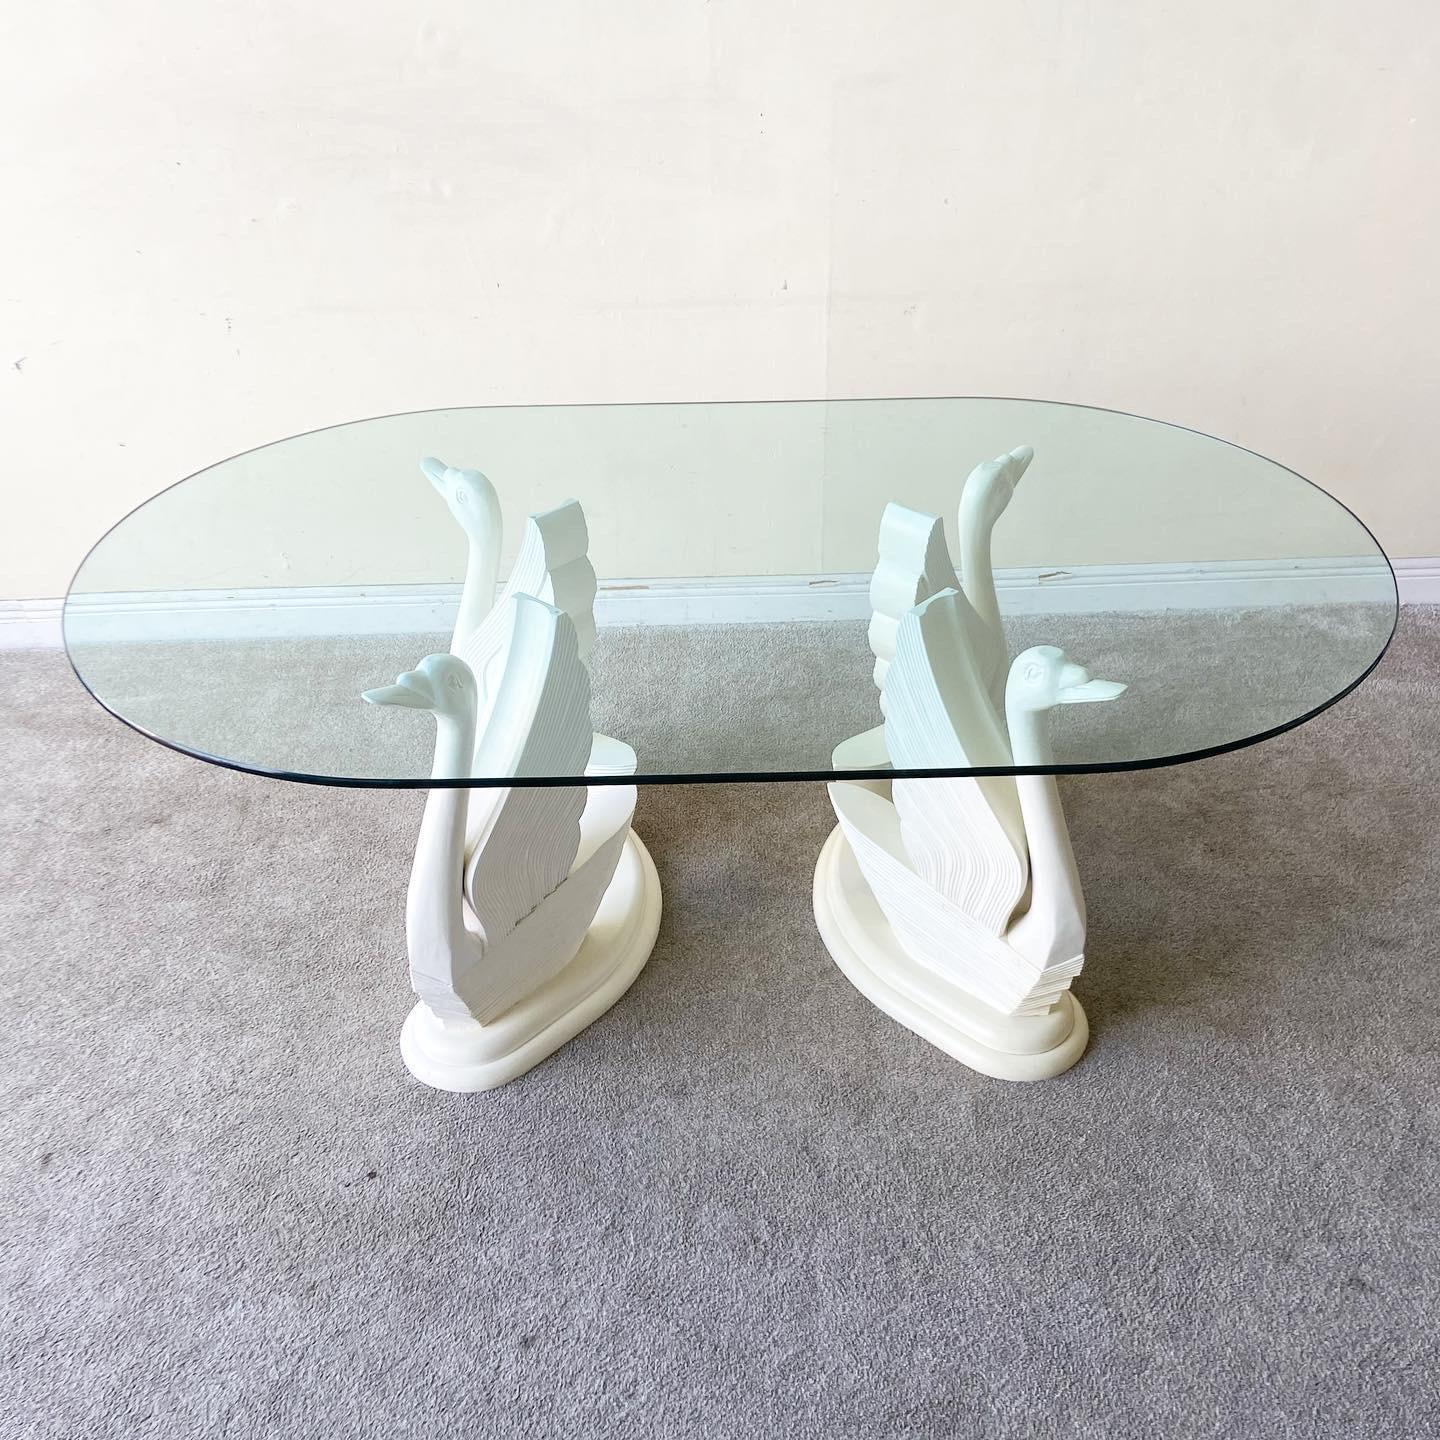 Stunning 1980s oval glass top dining table. Glass rests on two identical pedestals, each of which are comprised to a pair of swans.